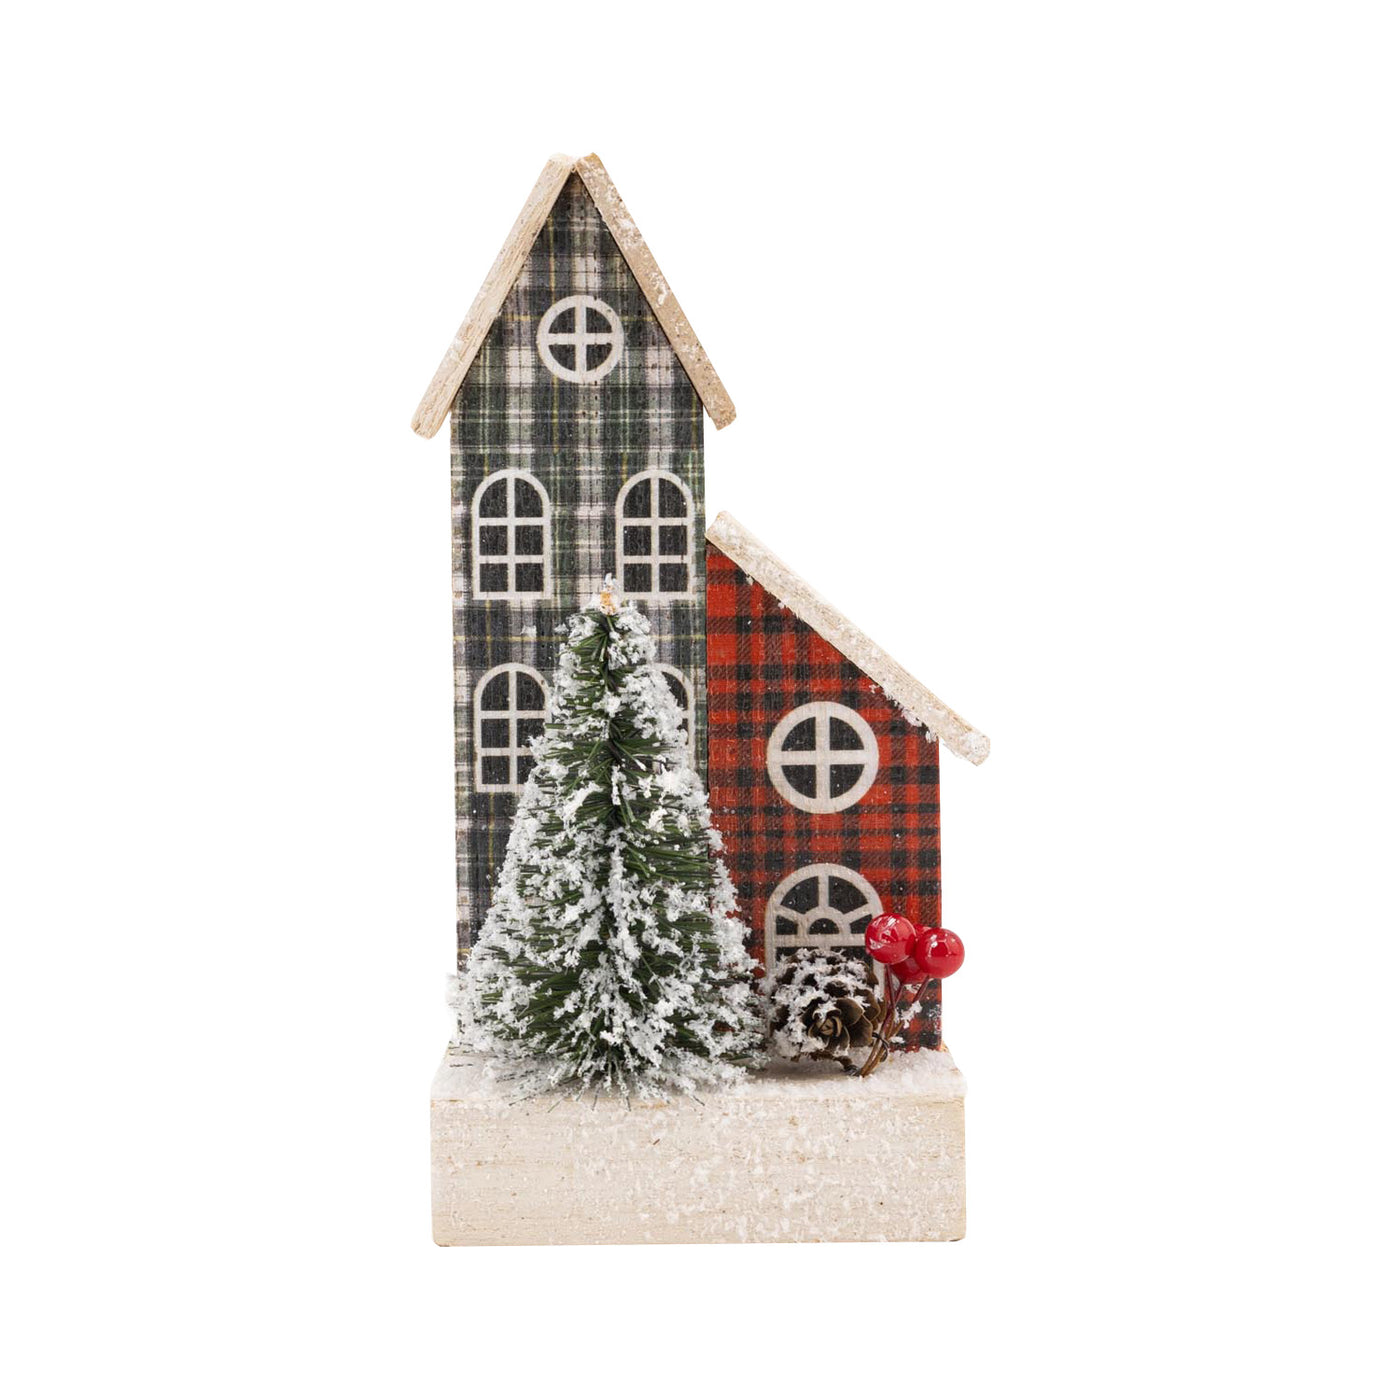 Wooden House Scene with Trees, Small